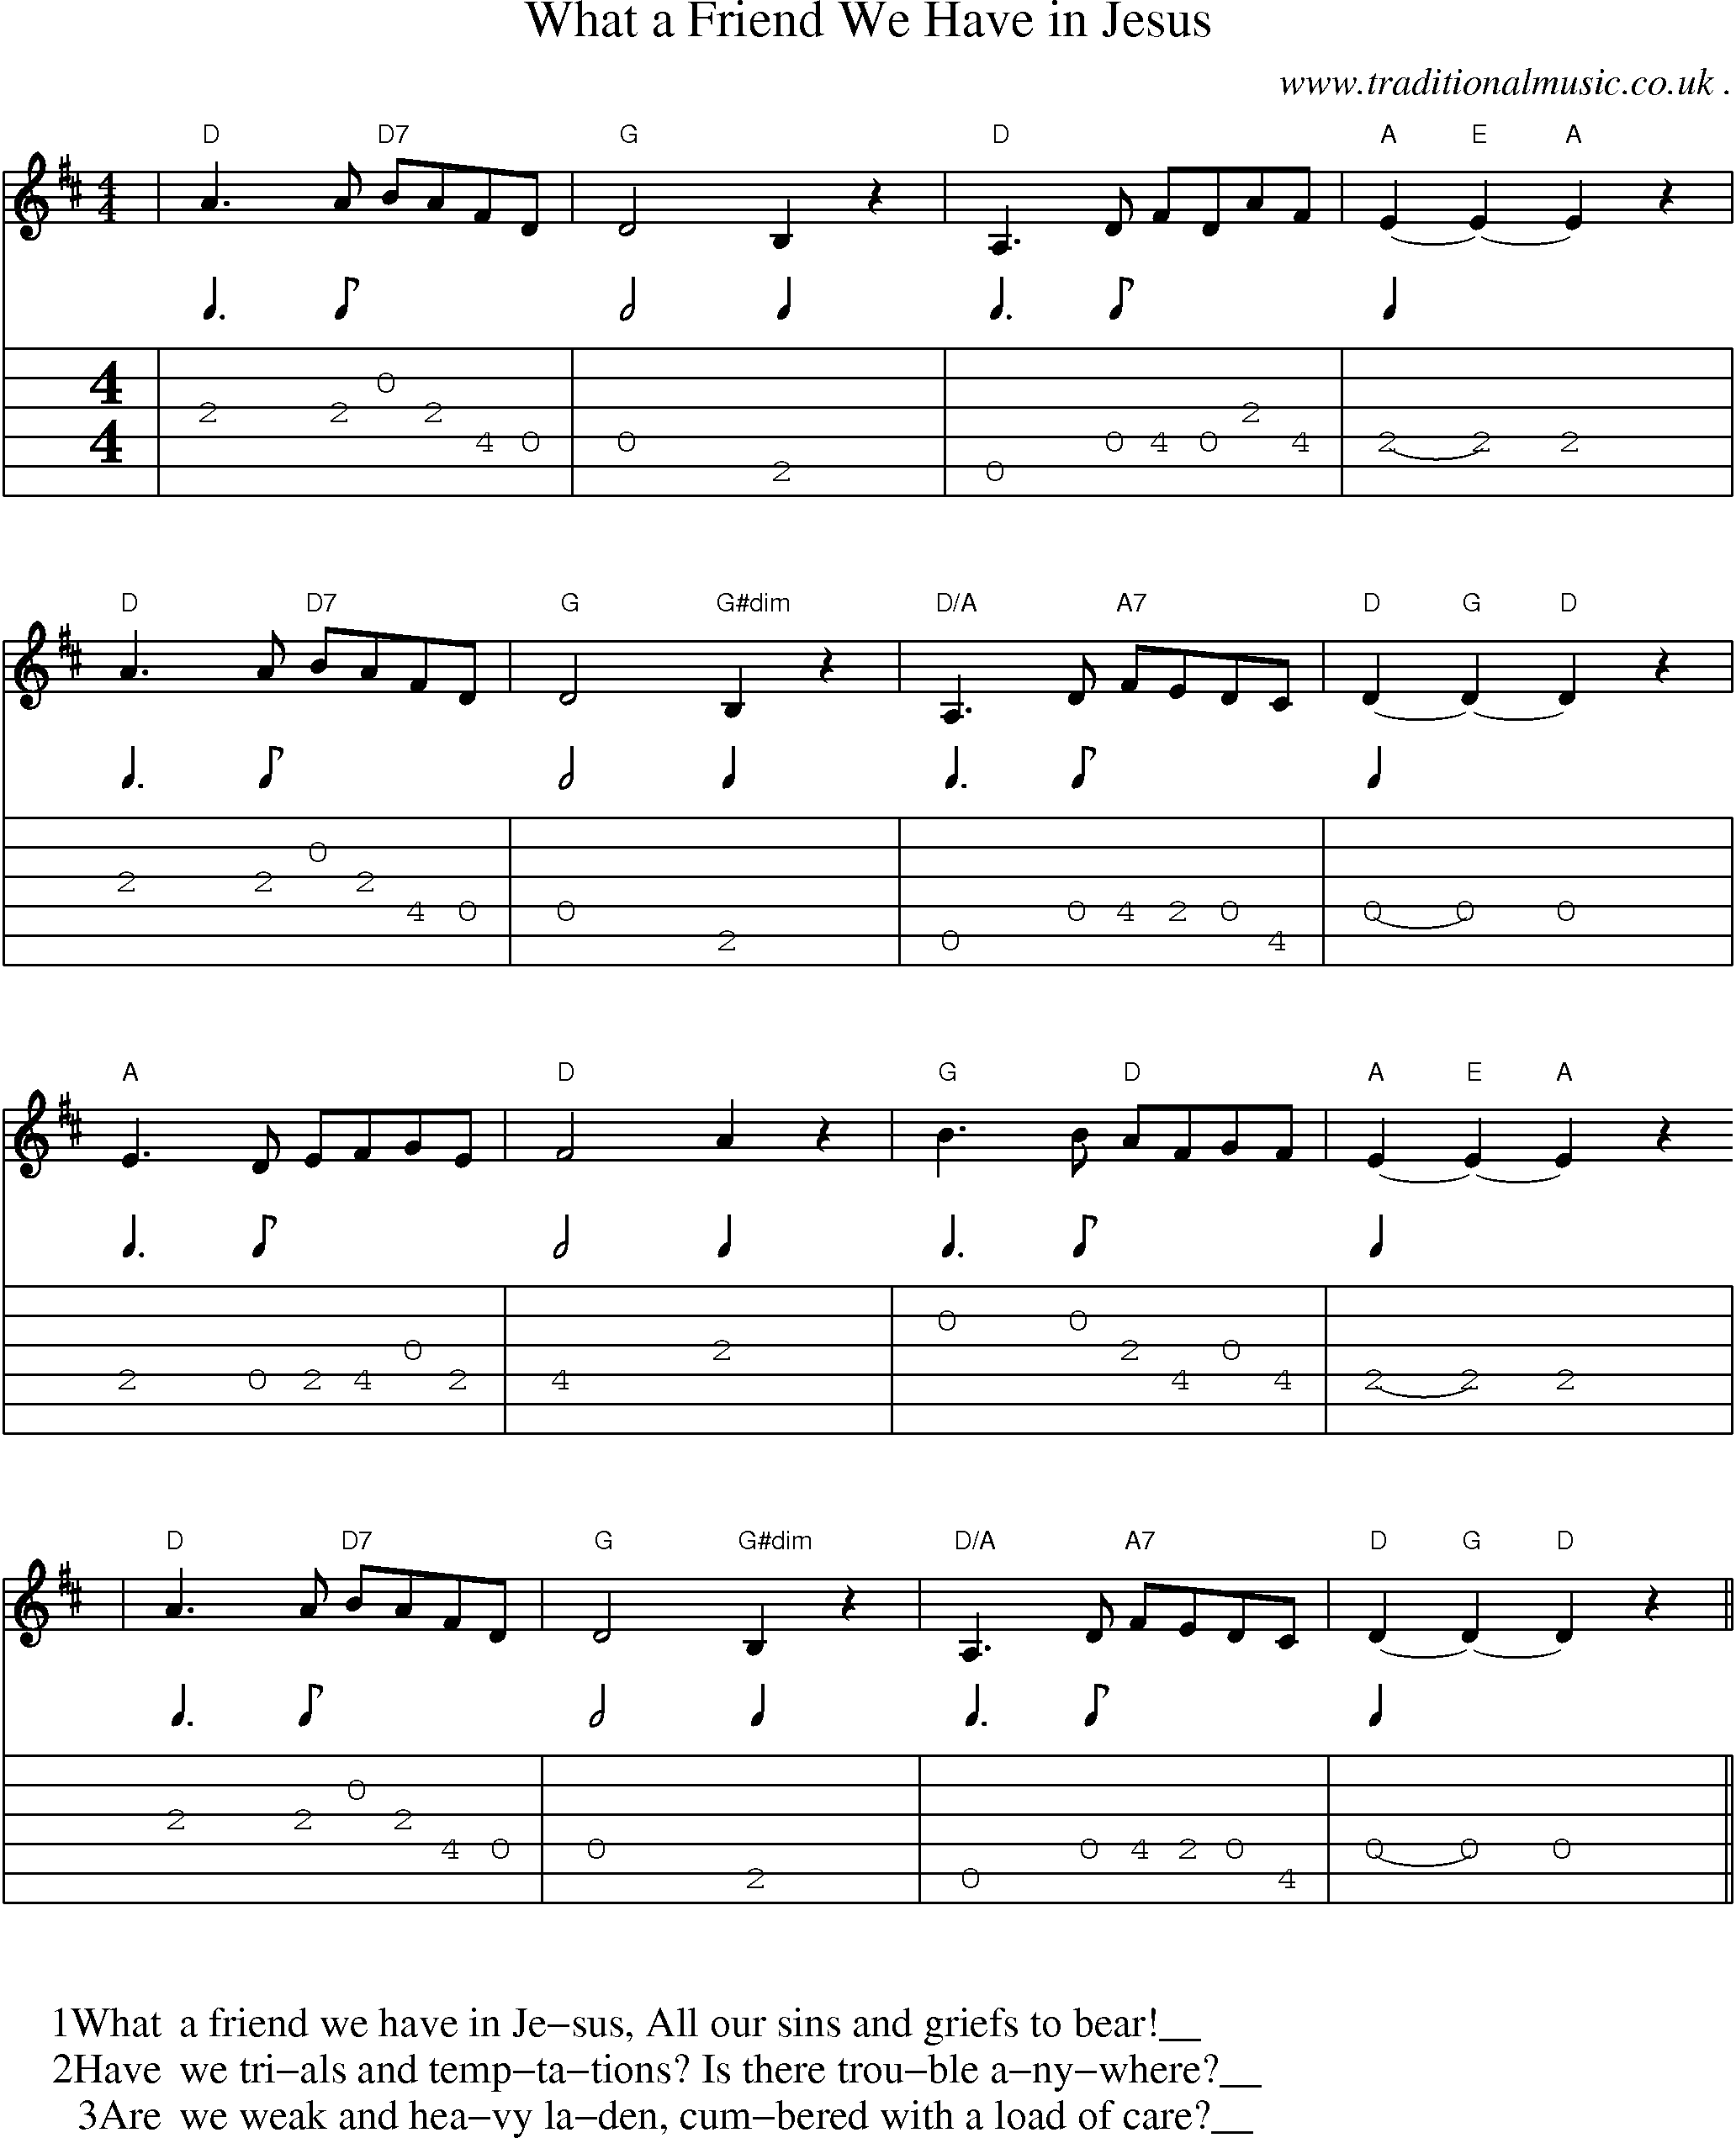 Music Score and Guitar Tabs for What A Friend We Have In Jesus